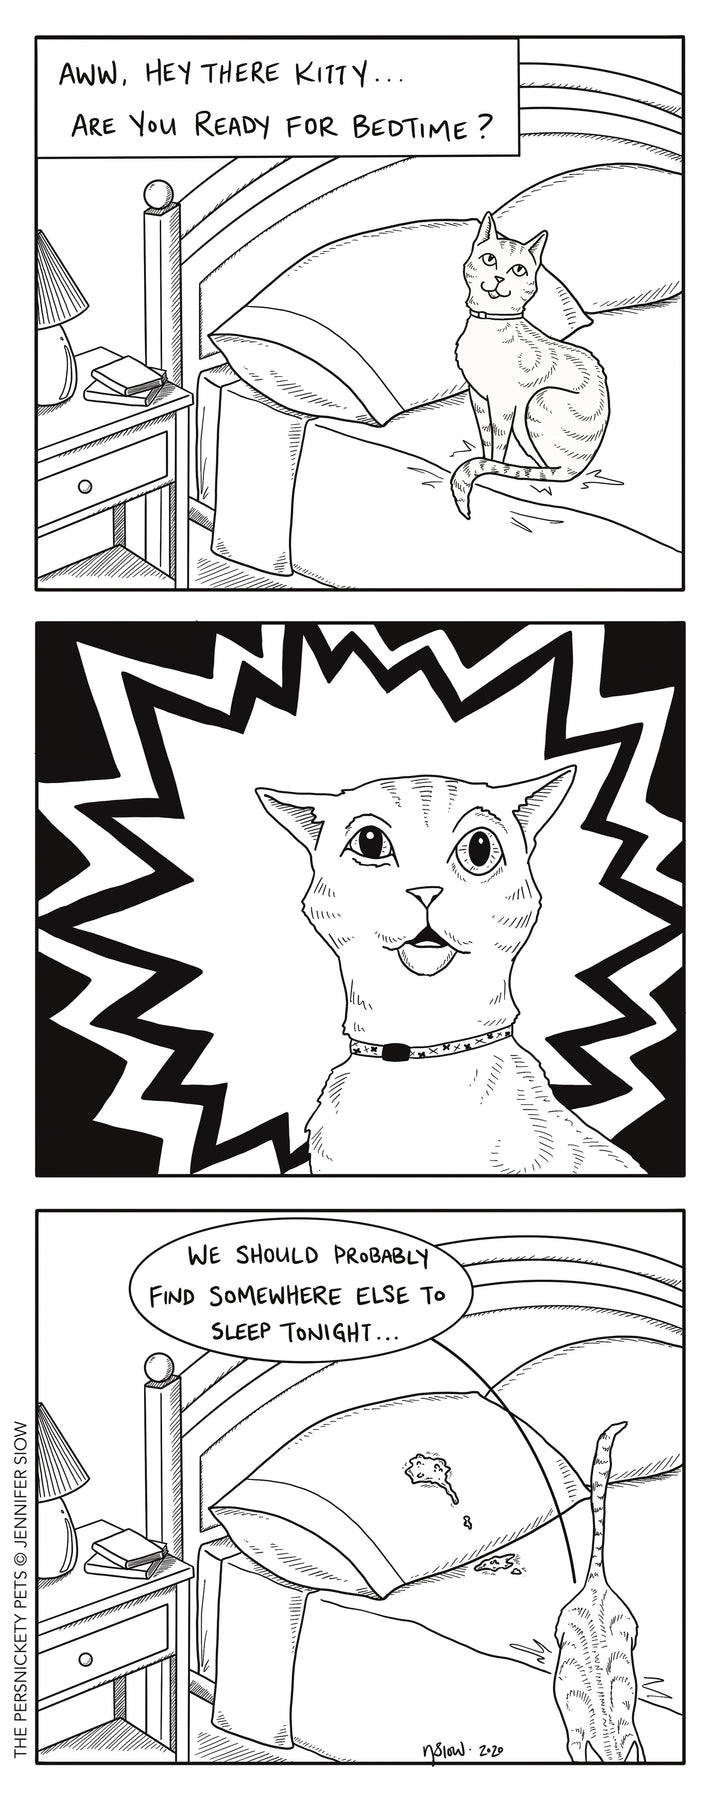 Persimmon Peak: the Persnickety Pets comic 9/27/20